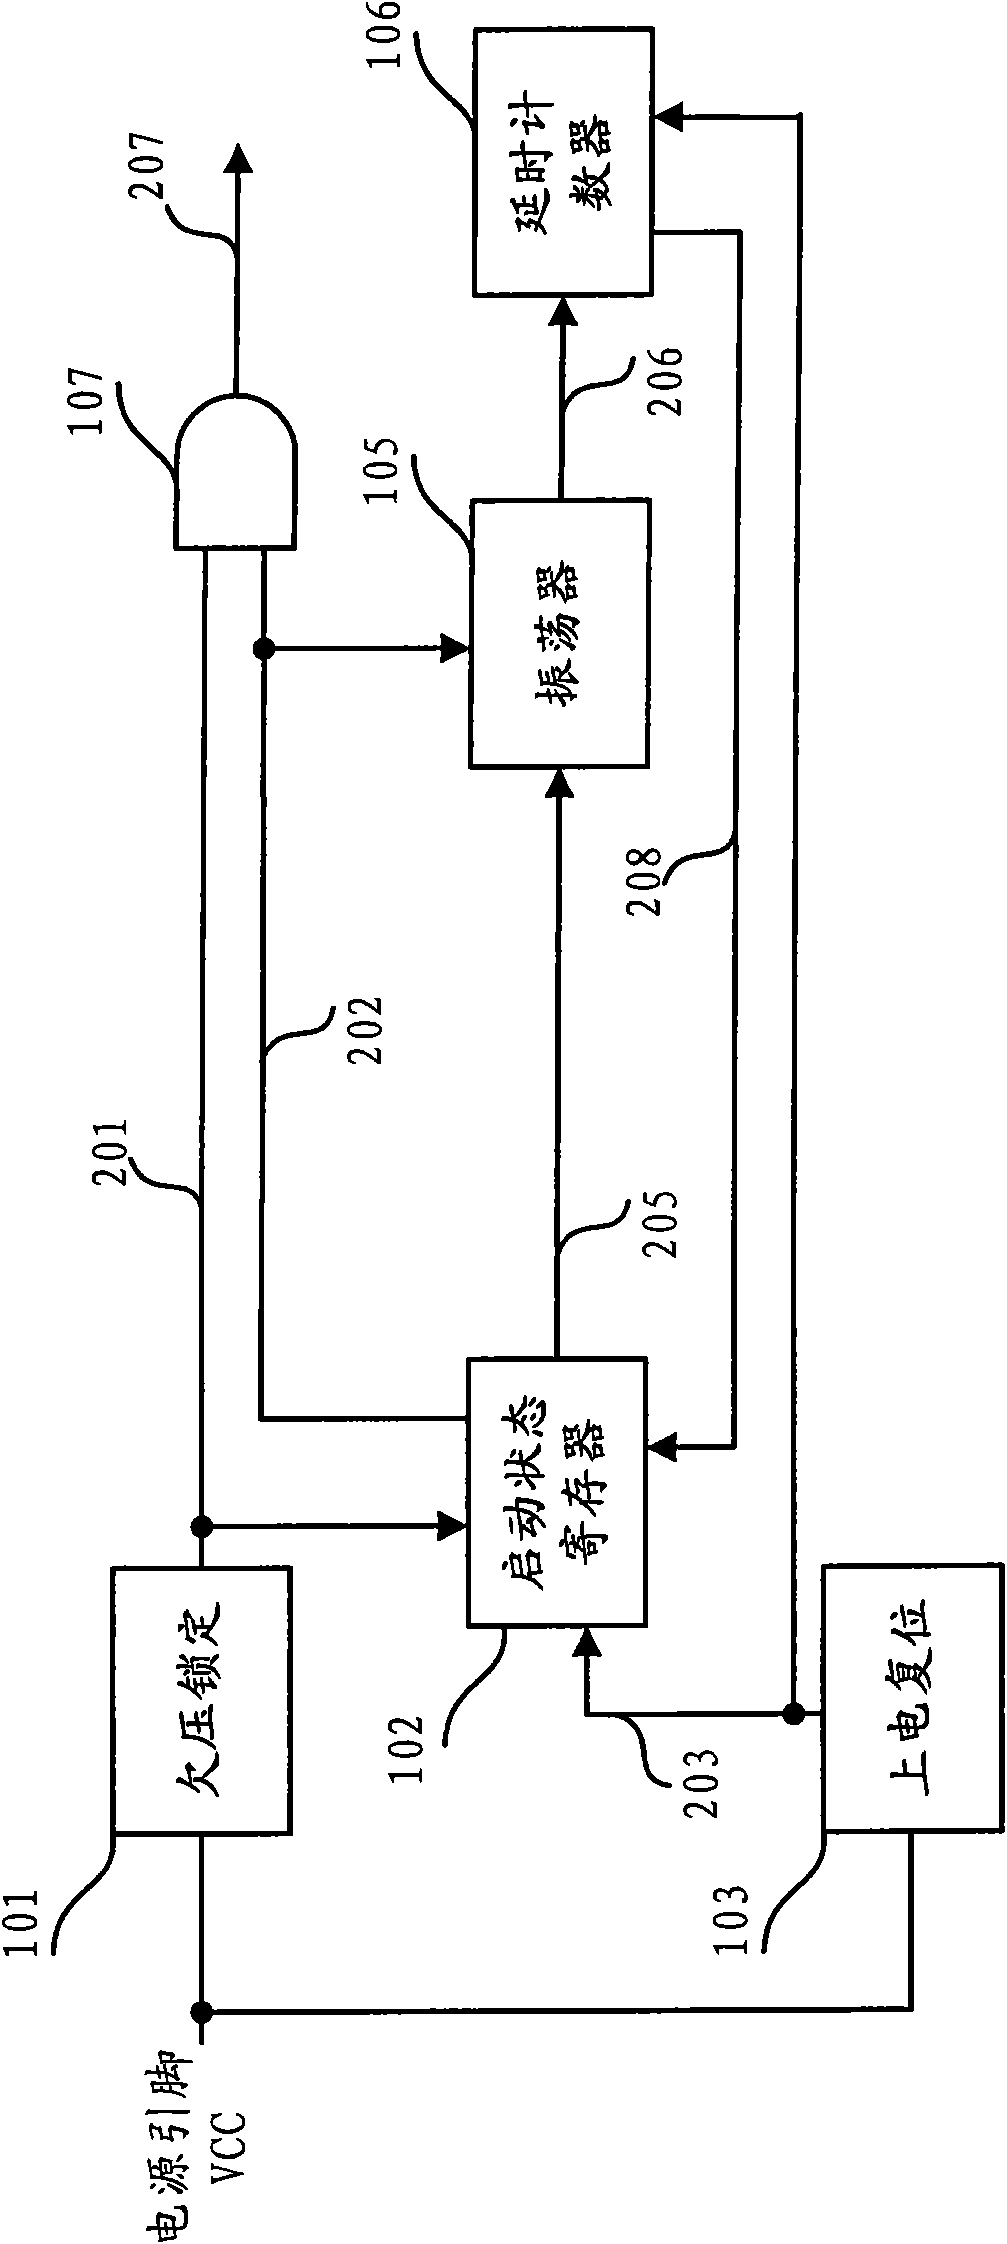 Secondary startup control circuit and switching power supply